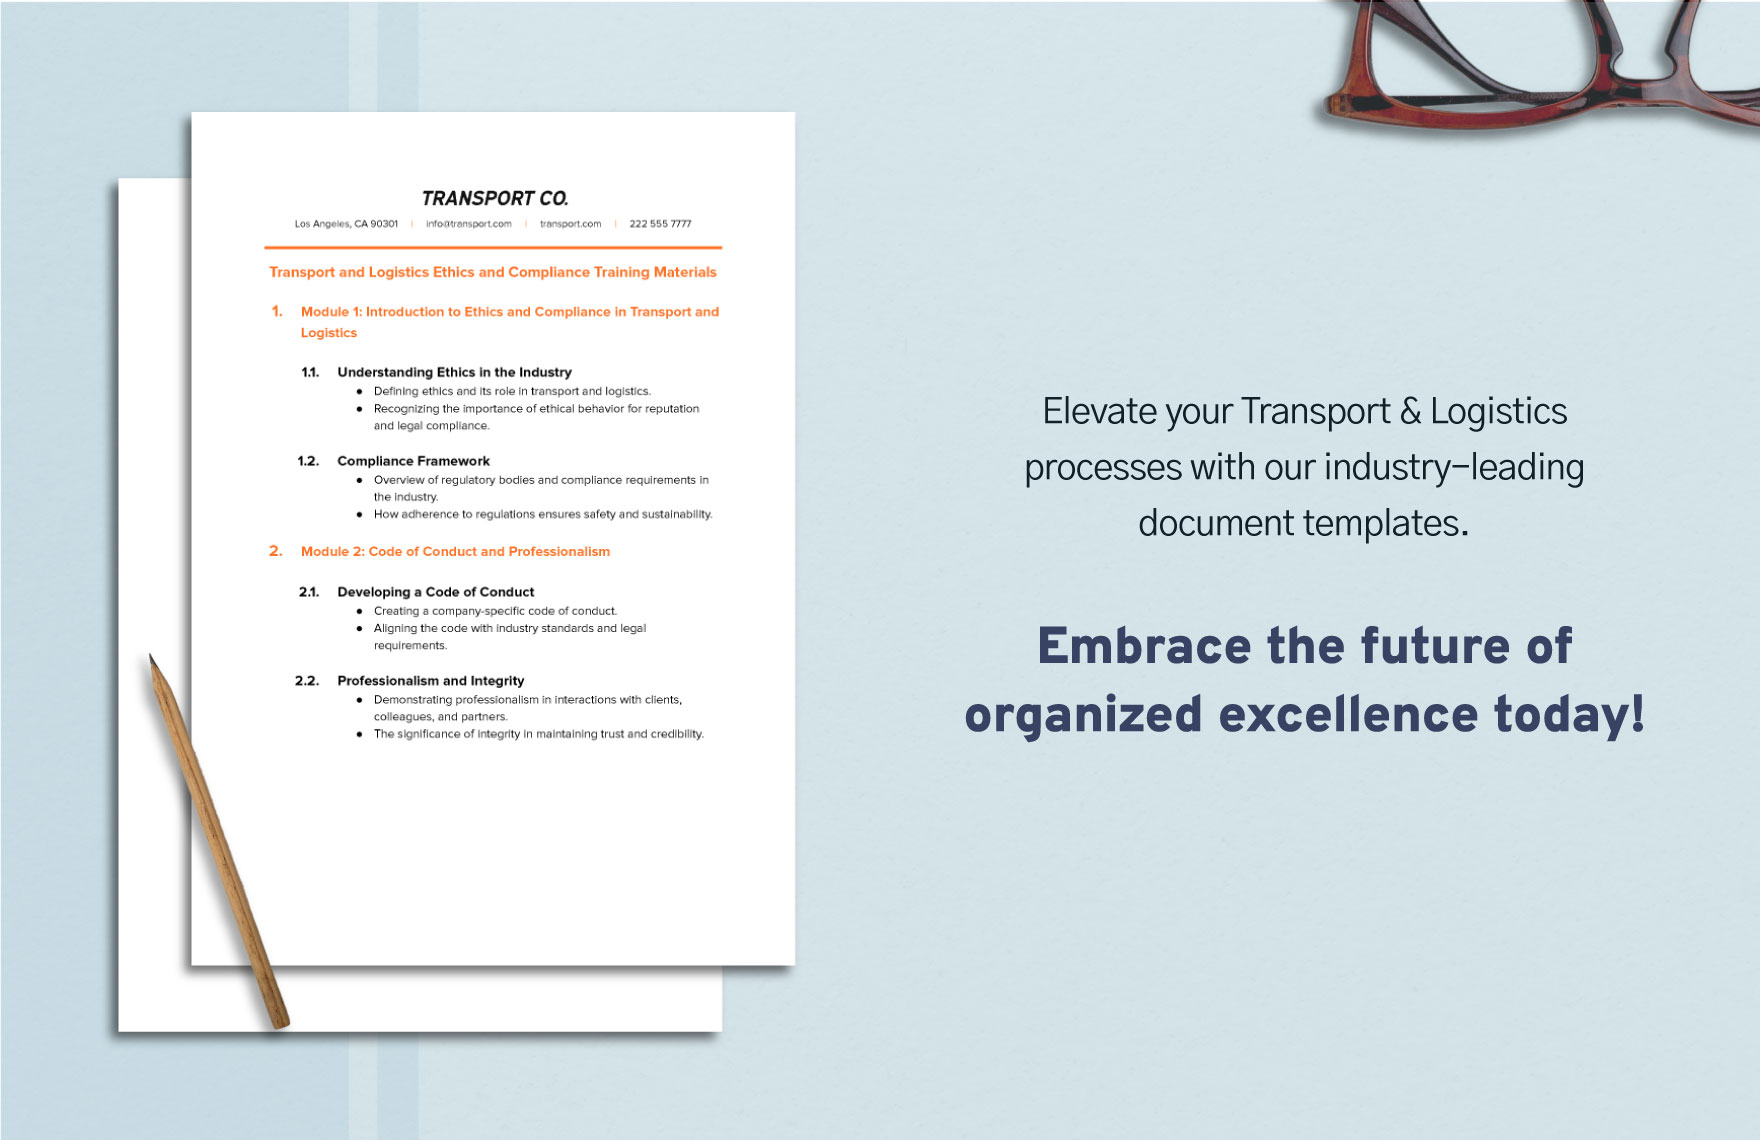 Transport and Logistics Ethics and Compliance Training Materials Template